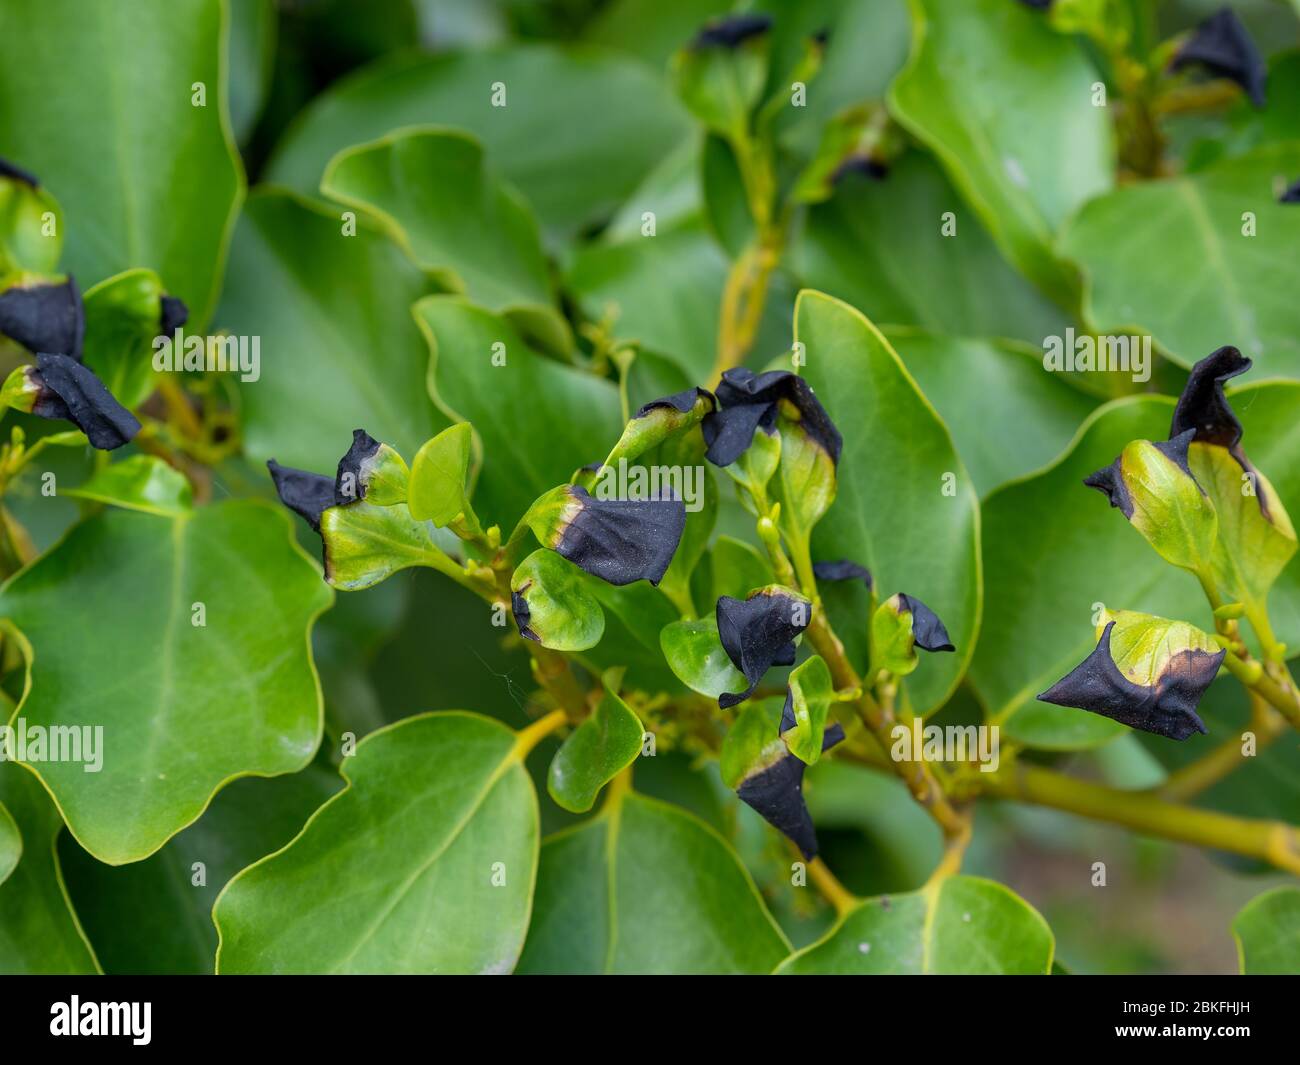 Griselinia littoralis plant detail. Black leaf tips probably due to frost damage. Stock Photo